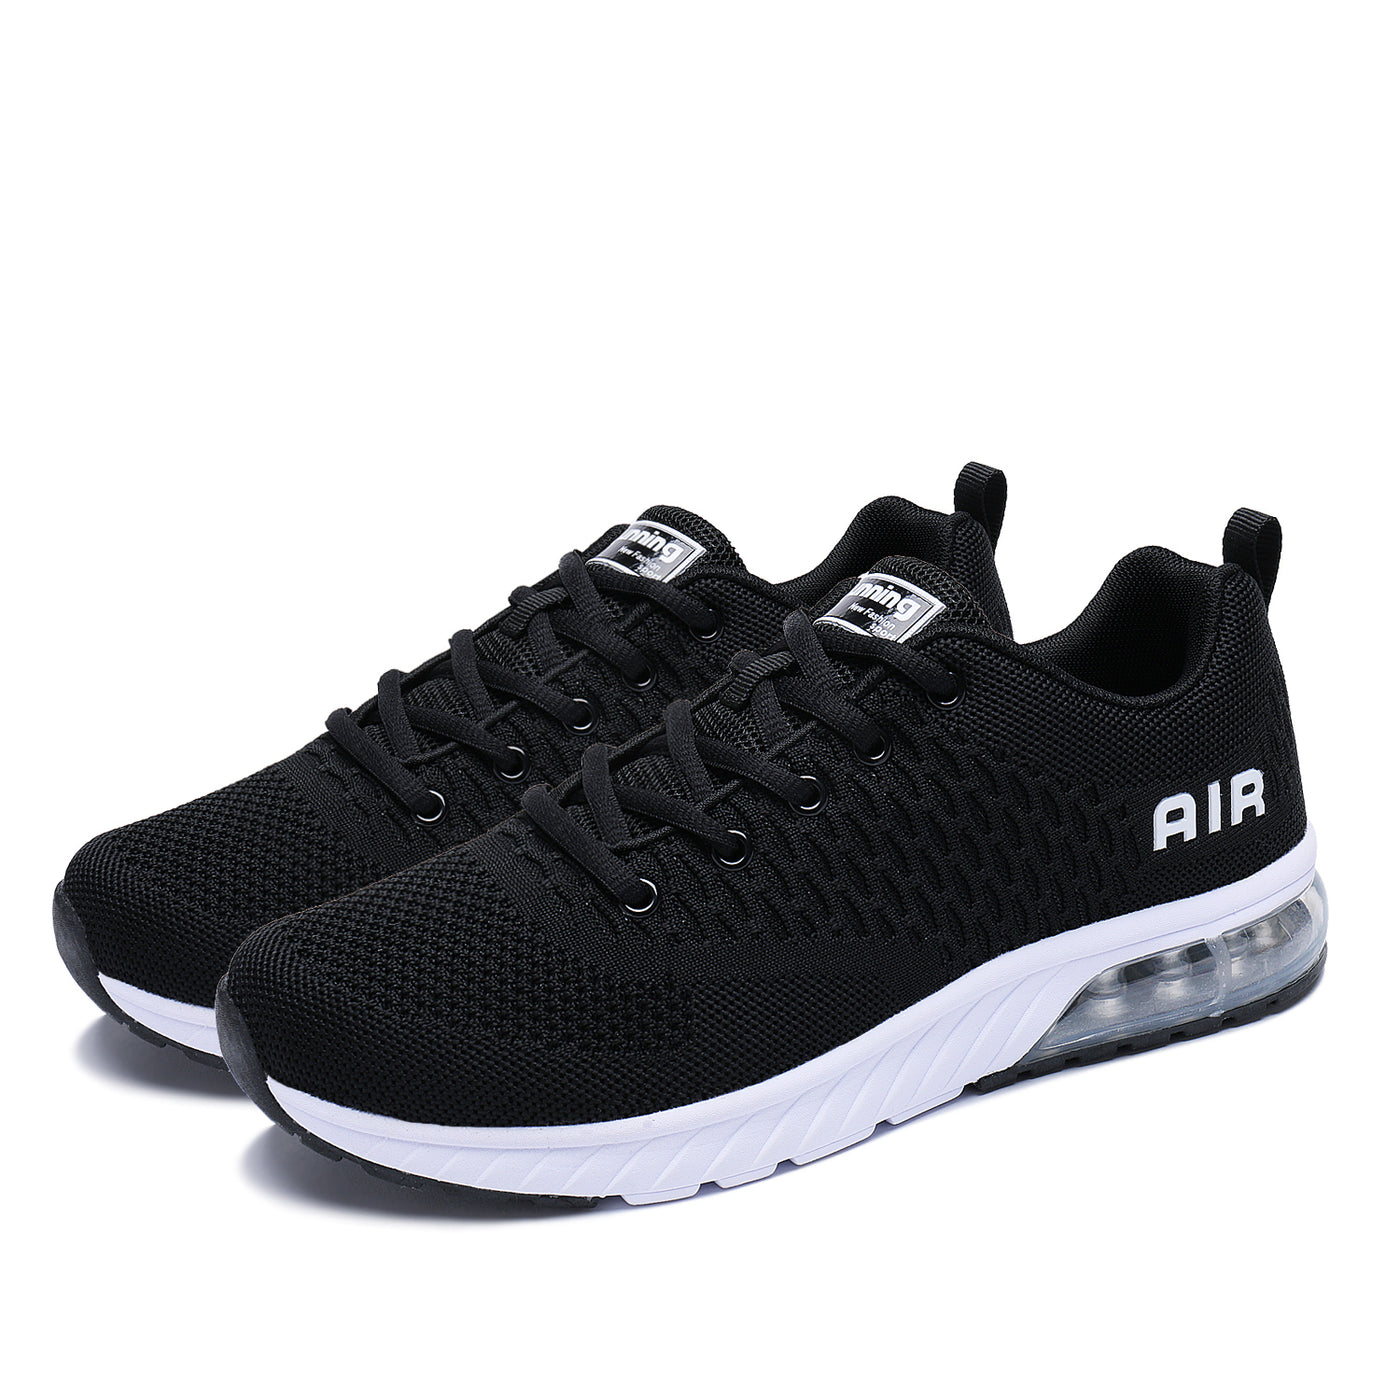 Ladies Stretch Knit Sneakers Breathable Sports Tennis